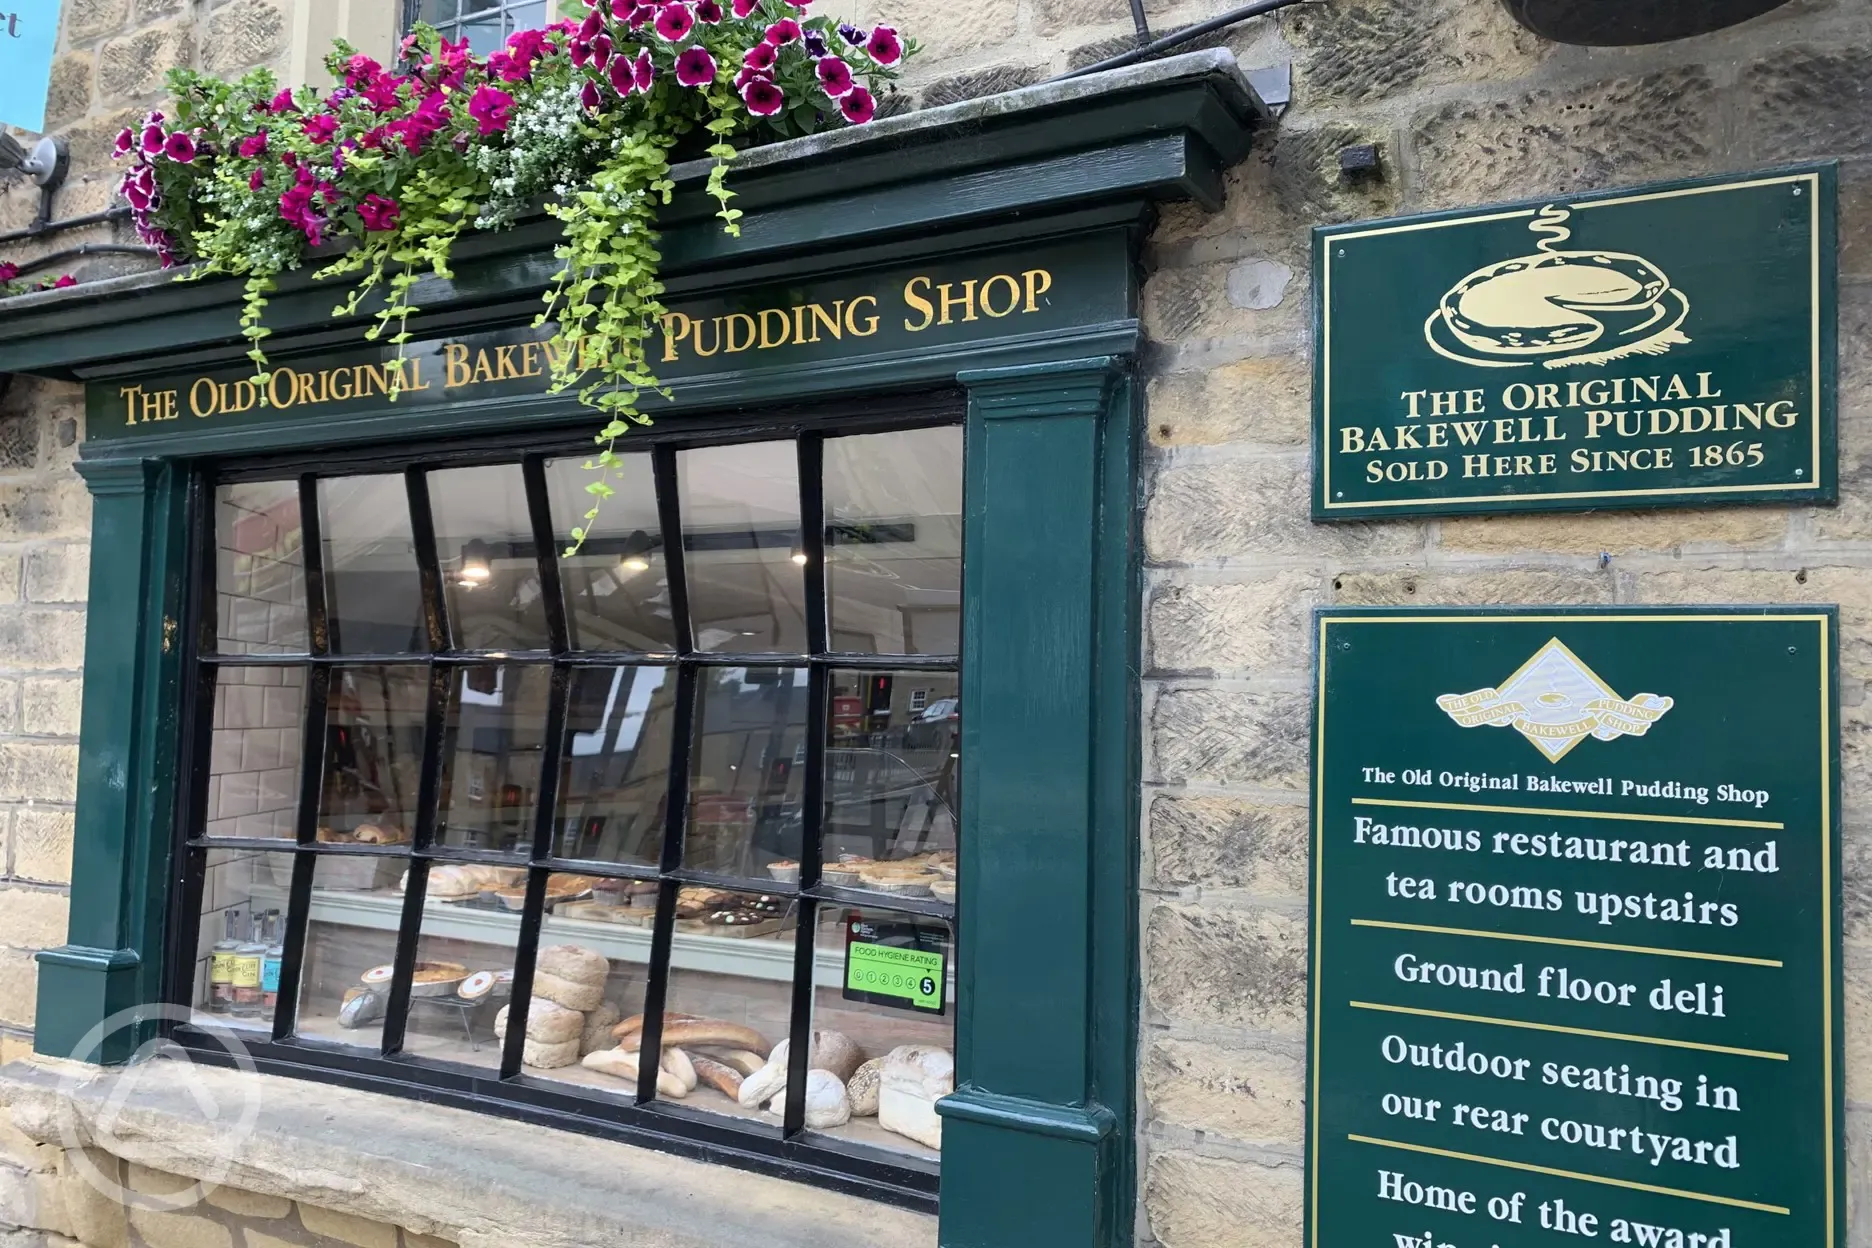 Famous pudding shop in Bakewell selling the Bakewell pudding